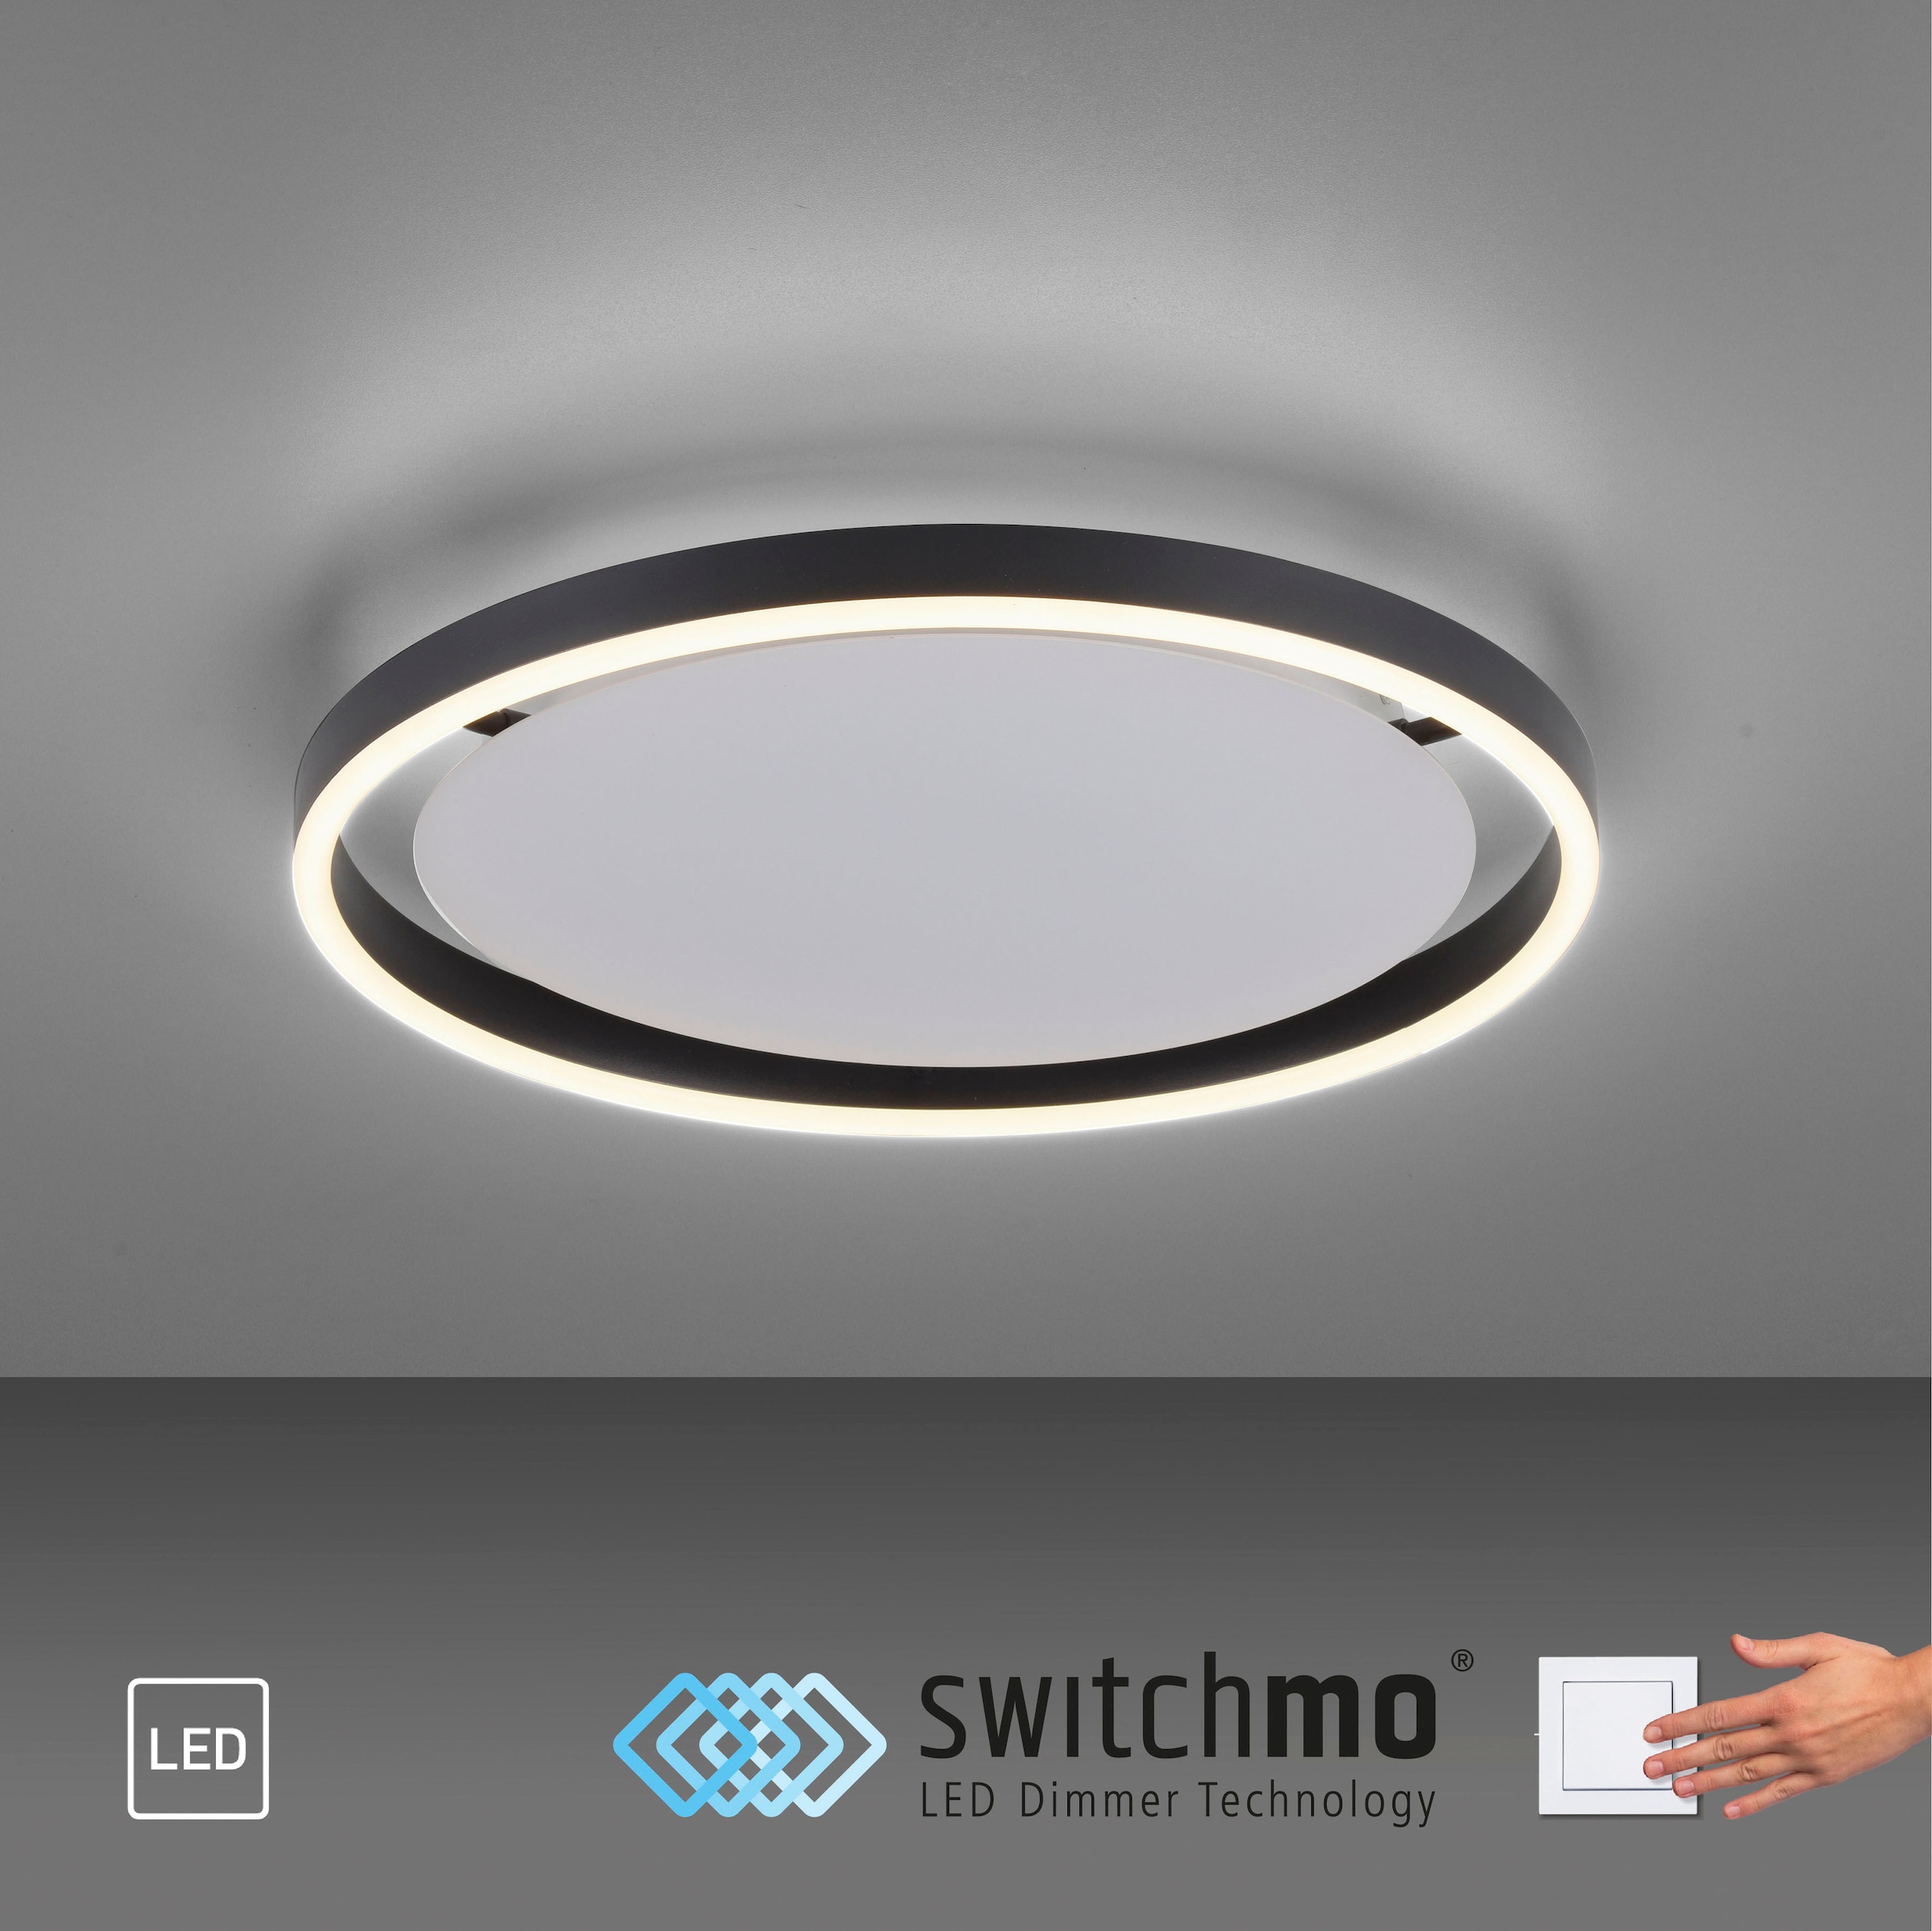 JUST LIGHT Deckenleuchte »RITUS«, 1 flammig-flammig, LED, dimmbar, Switchmo,  dimmbar, Switchmo im OTTO Online Shop